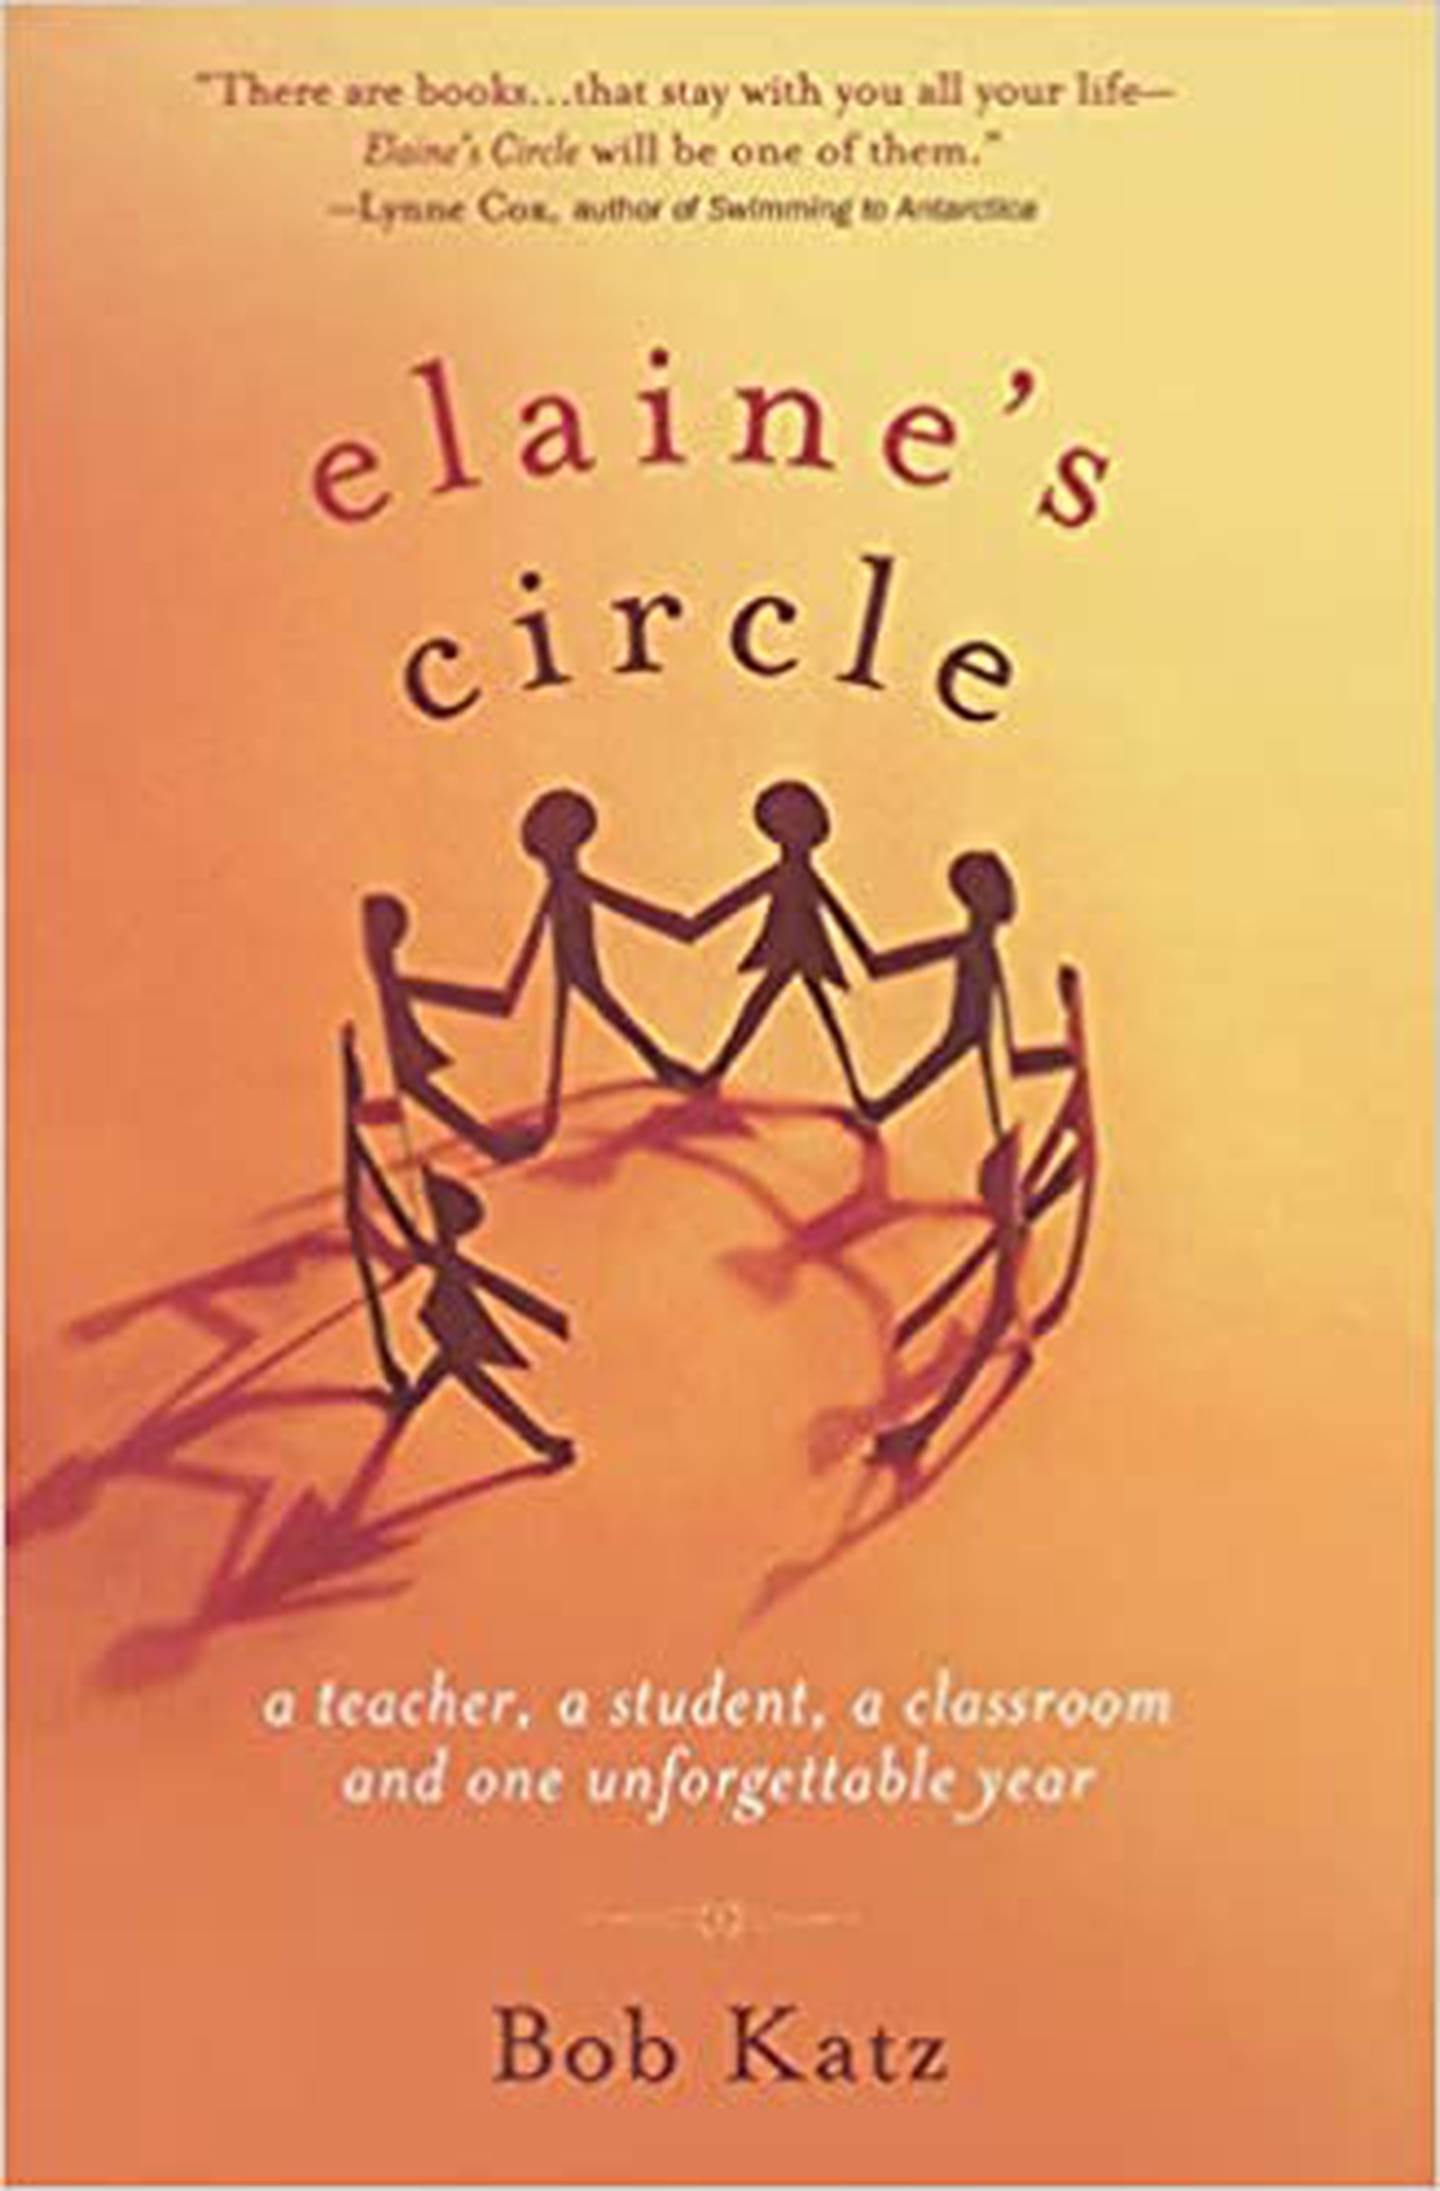 ‘Elaine’s Circle,’ released in new edition, highlights strength of hope and community